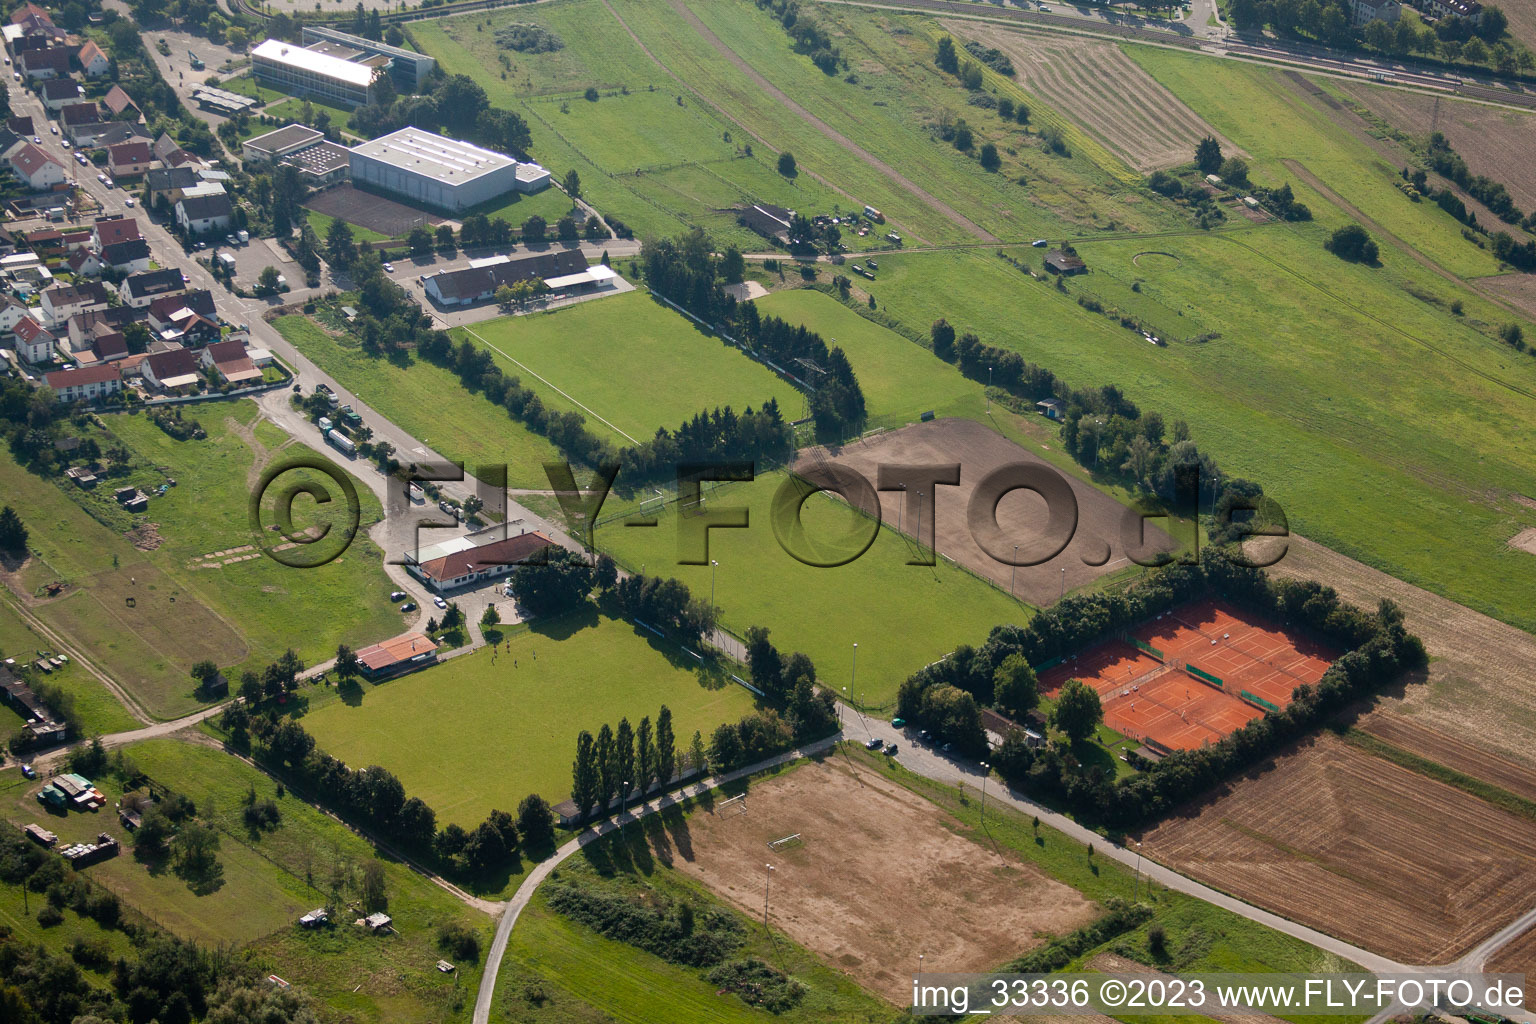 TV 1896 eV, sports fields, The Olive in the district Spöck in Stutensee in the state Baden-Wuerttemberg, Germany